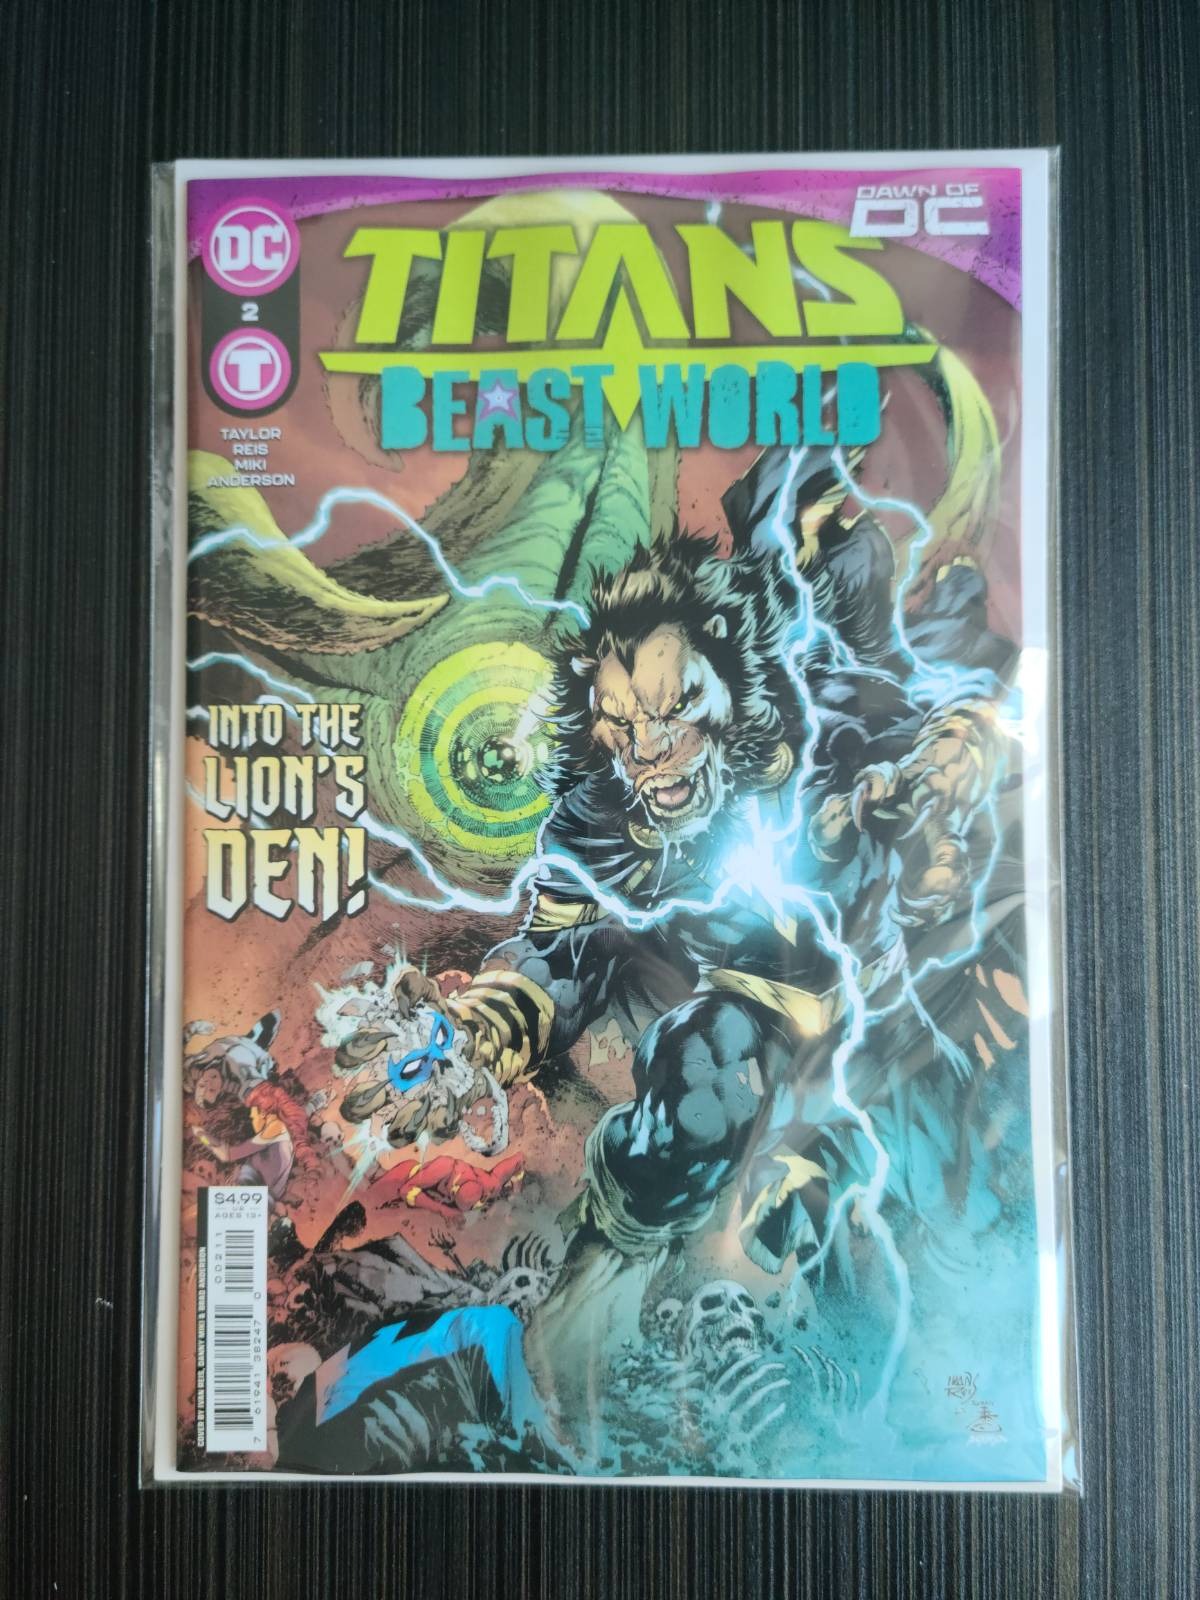 Titans Beast World #2 (of 6) Cover A Ivan Reis & Danny Miki